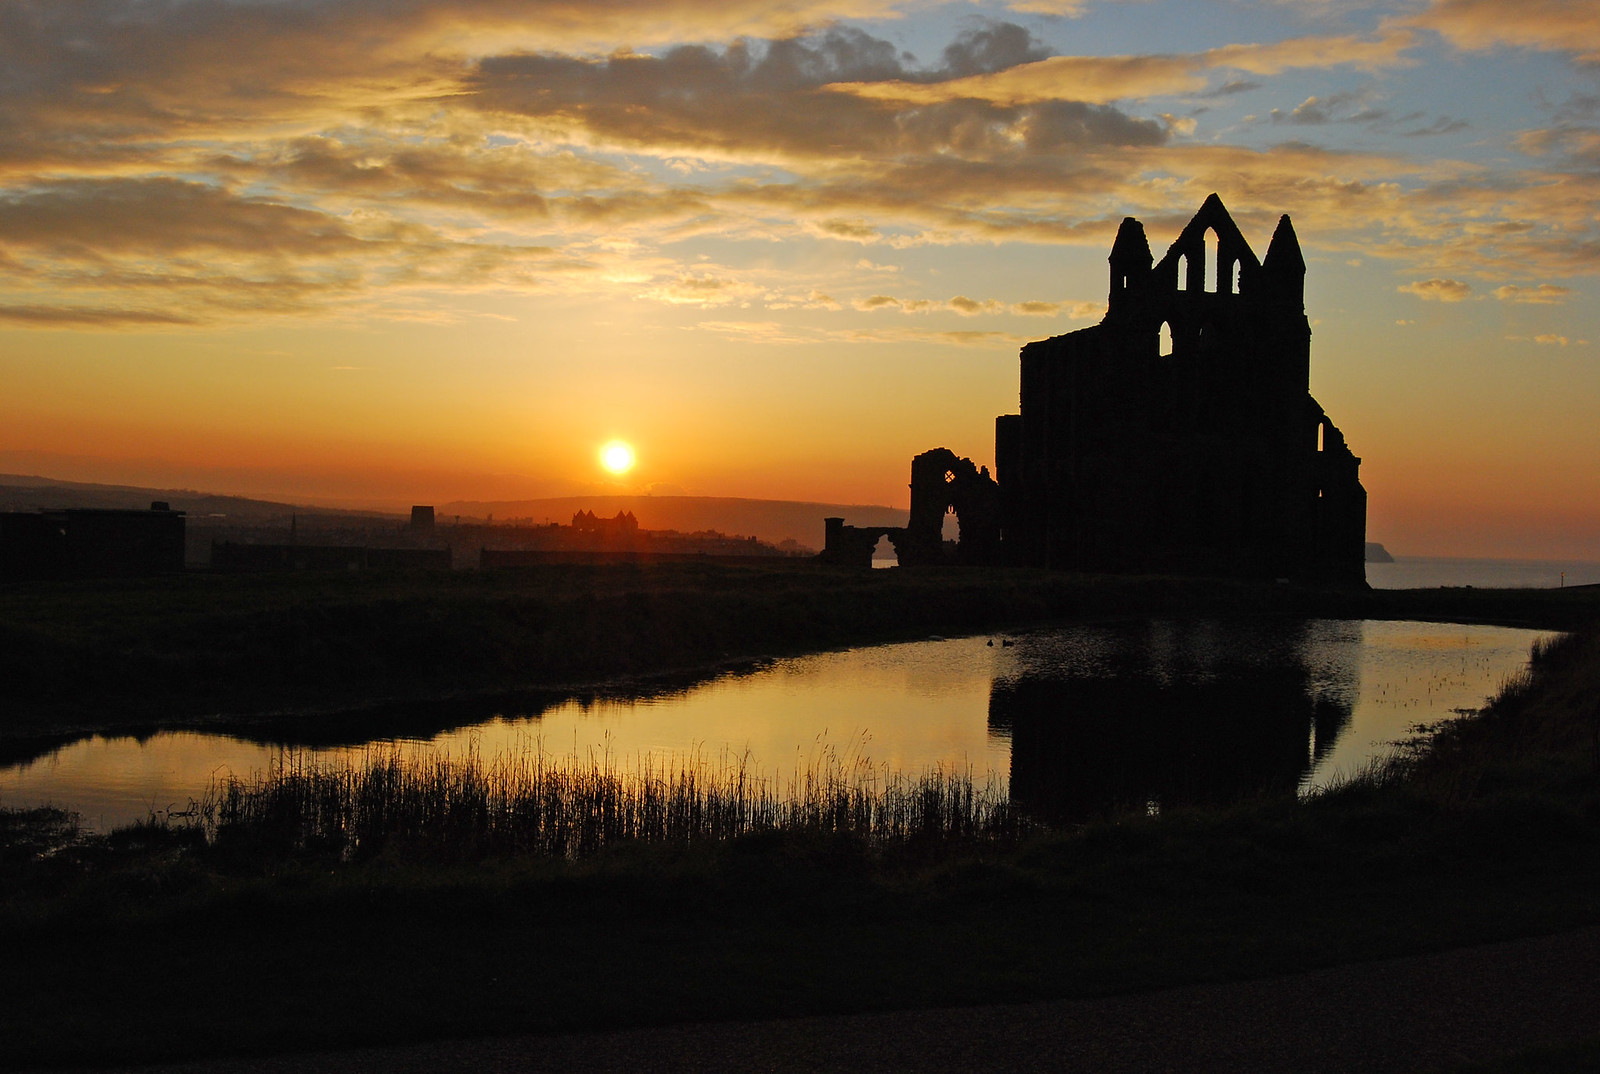 Whitby Abbey at sunset with reflections. Credit Ackers72